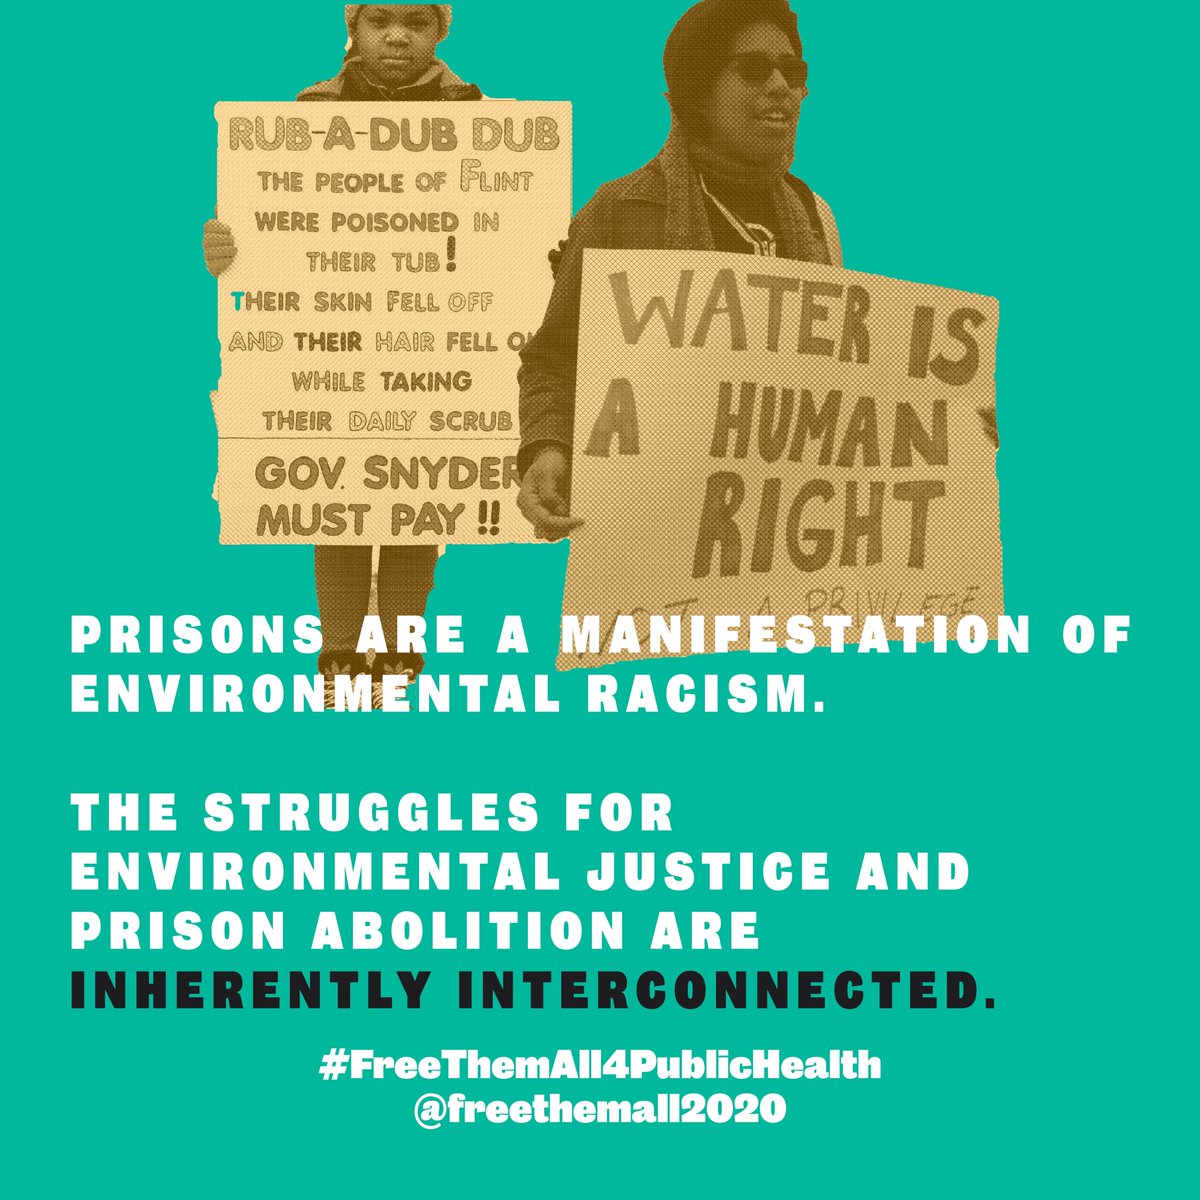 Prisons are a manifestation of environmental racism. The struggles for environmental justice and prison abolition are inherently connected.